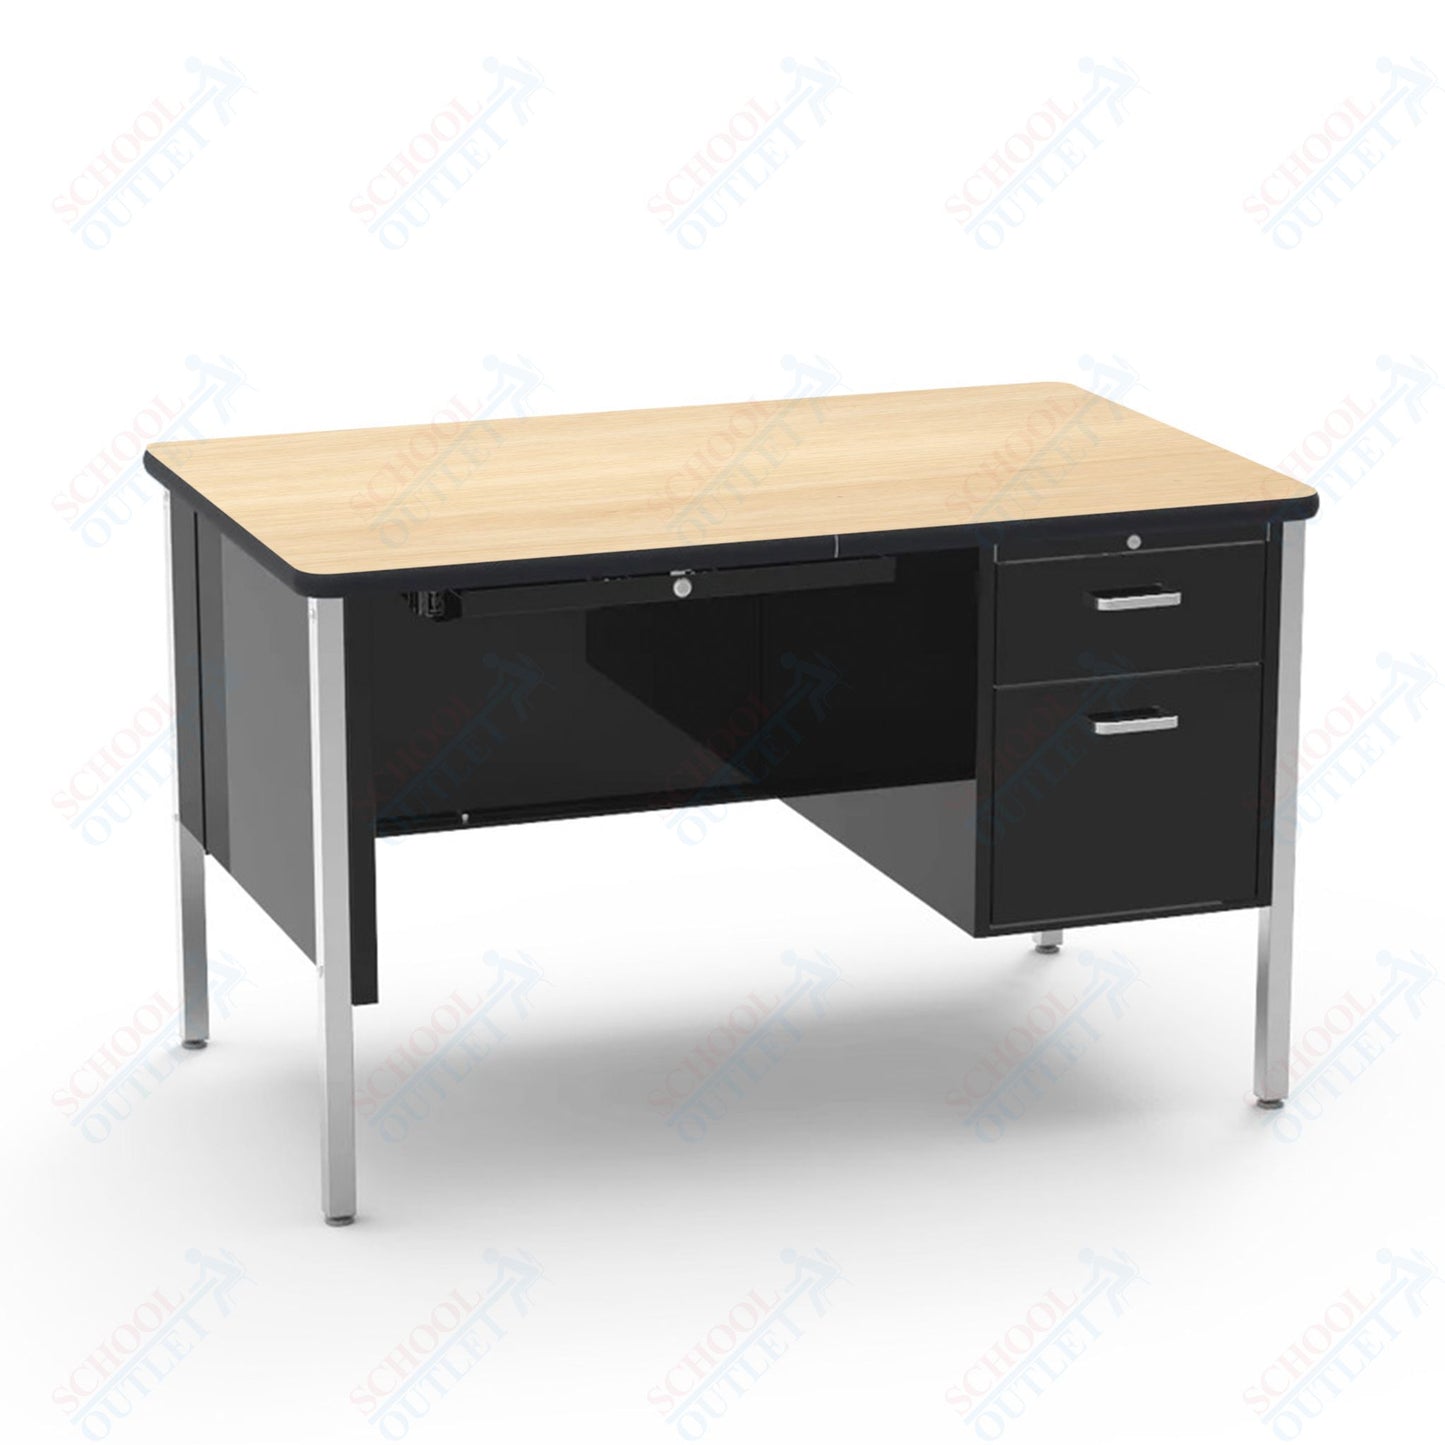 Virco 543 Teachers Desk with Drawers, High Quality 30 x 48 Laminate Top, Commercial Grade for School Classrooms